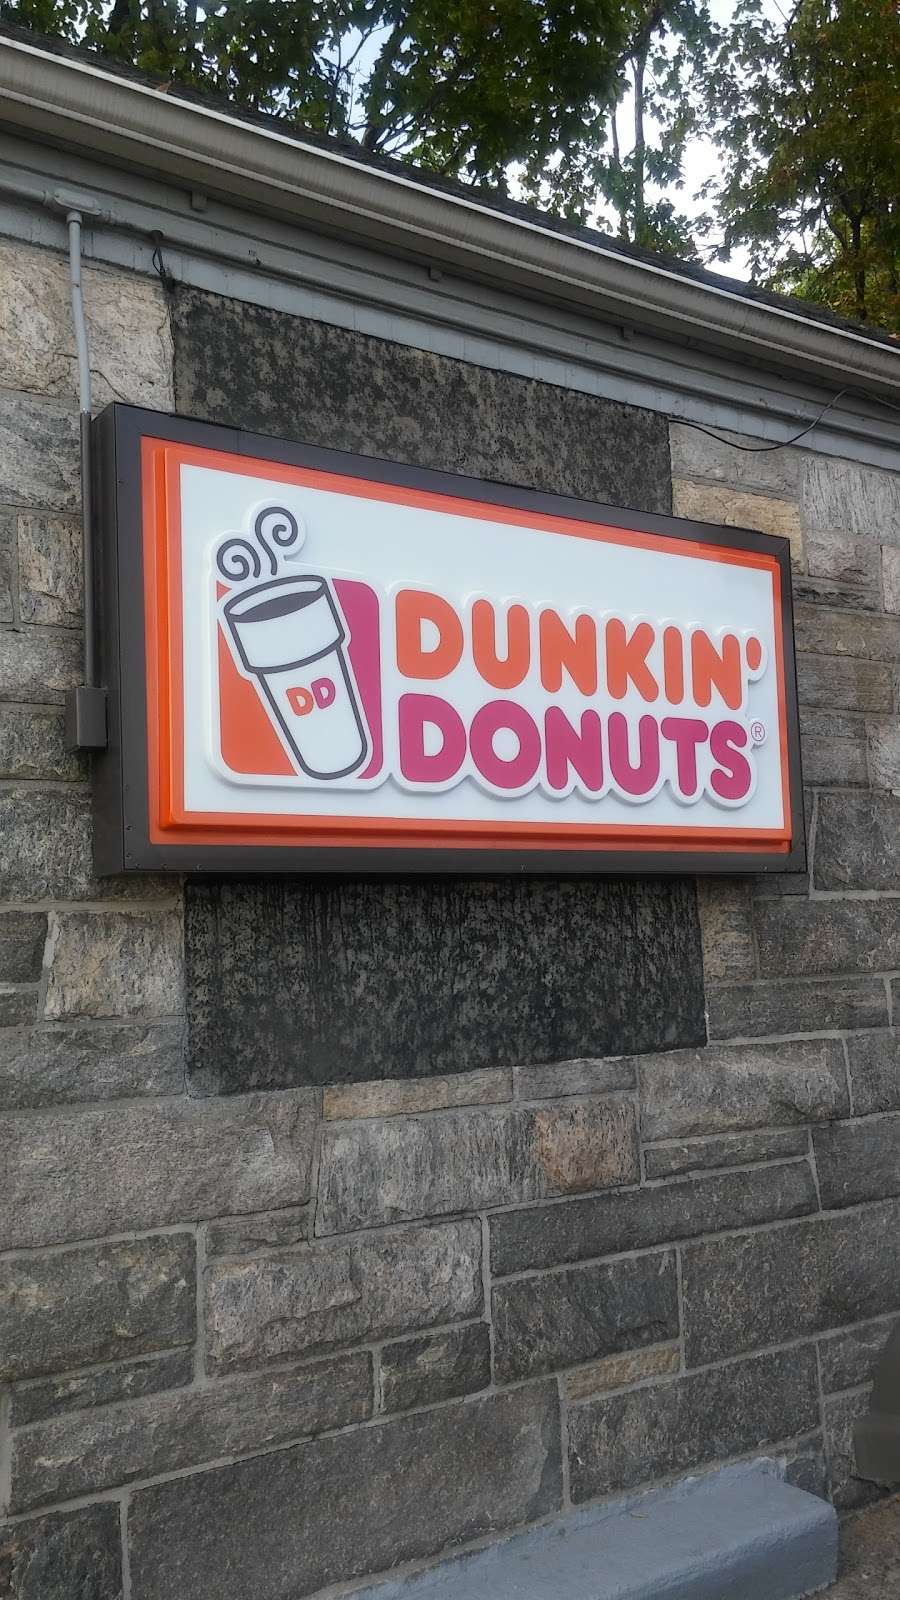 Dunkin Donuts - cafe  | Photo 7 of 10 | Address: 10702 Grand Central Pkwy, East Elmhurst, NY 11369, USA | Phone: (718) 397-8283